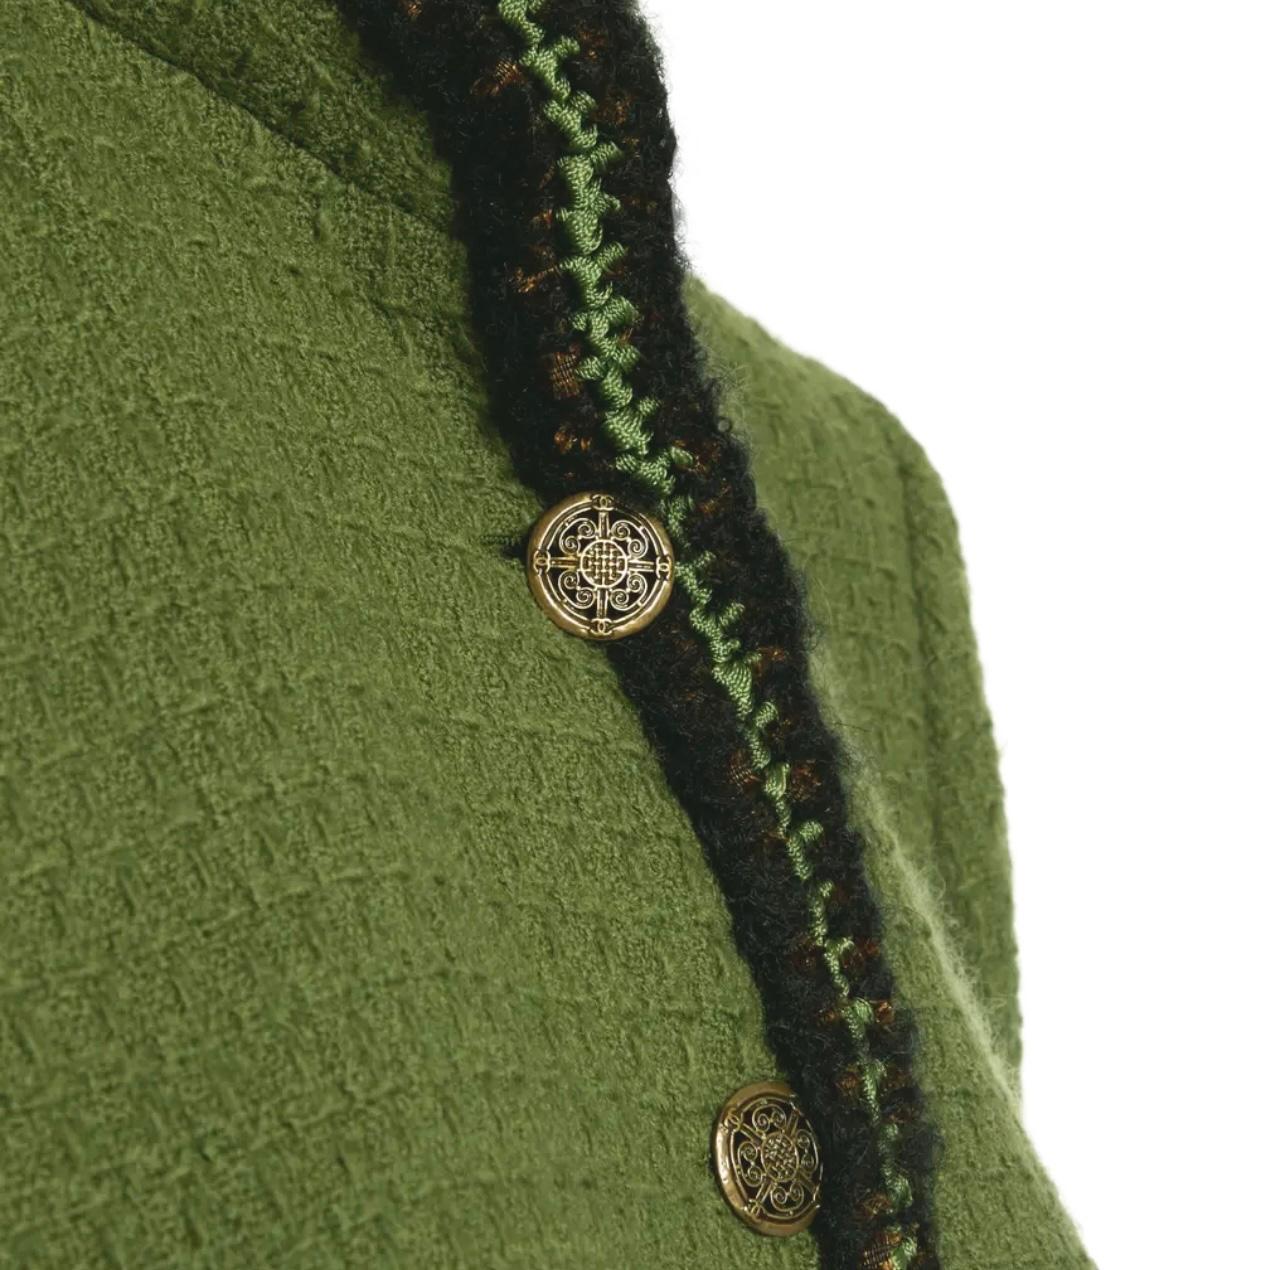 Chanel Most Iconic Green Tweed Jacket from Ad Campaign For Sale 3